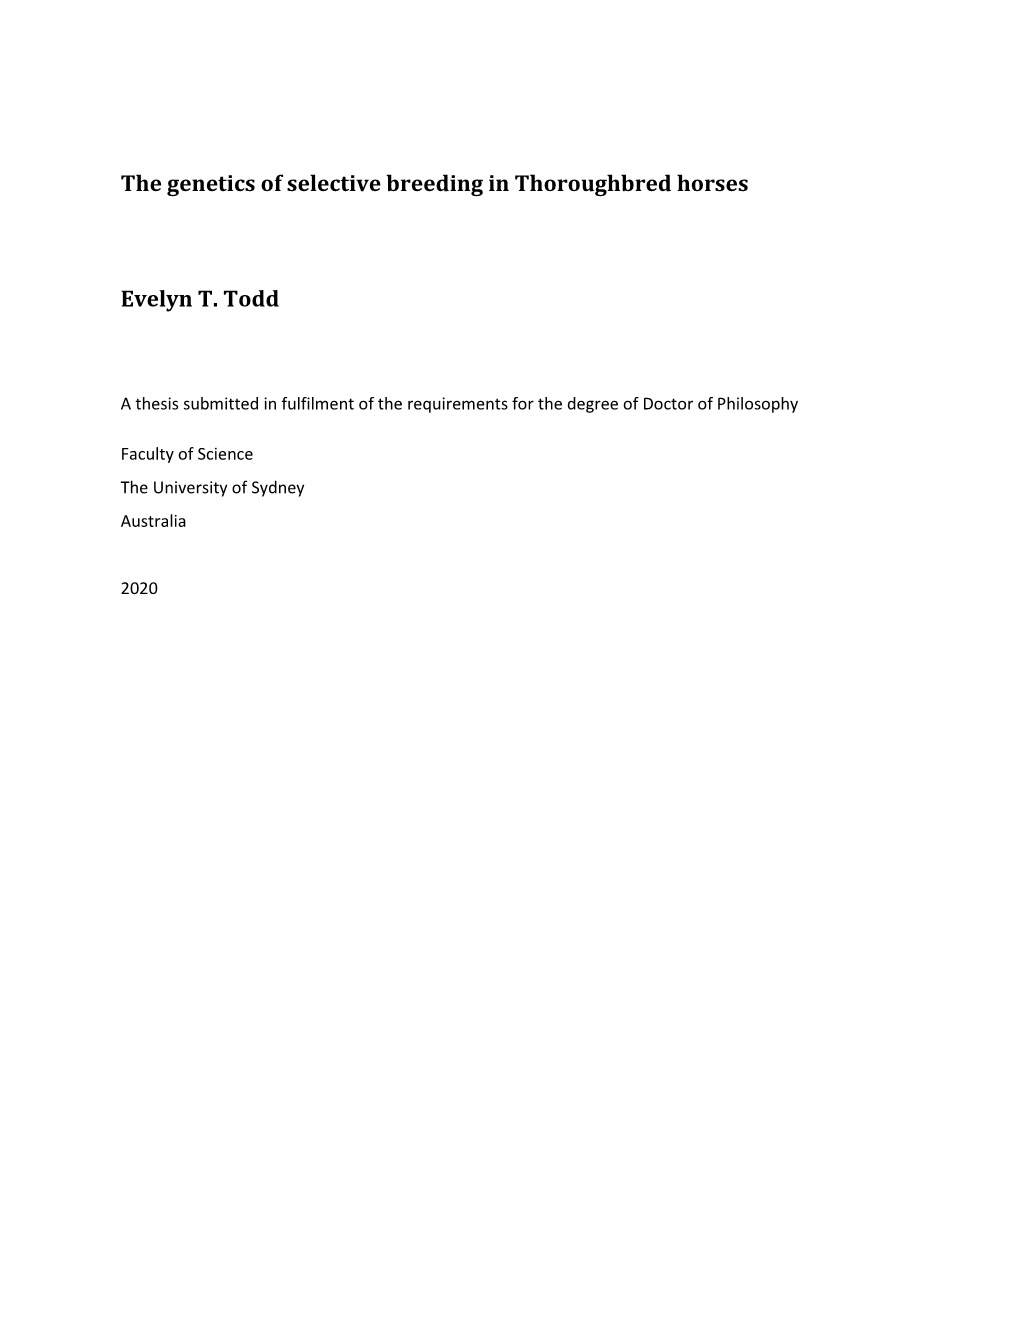 The Genetics of Selective Breeding in Thoroughbred Horses Evelyn T. Todd